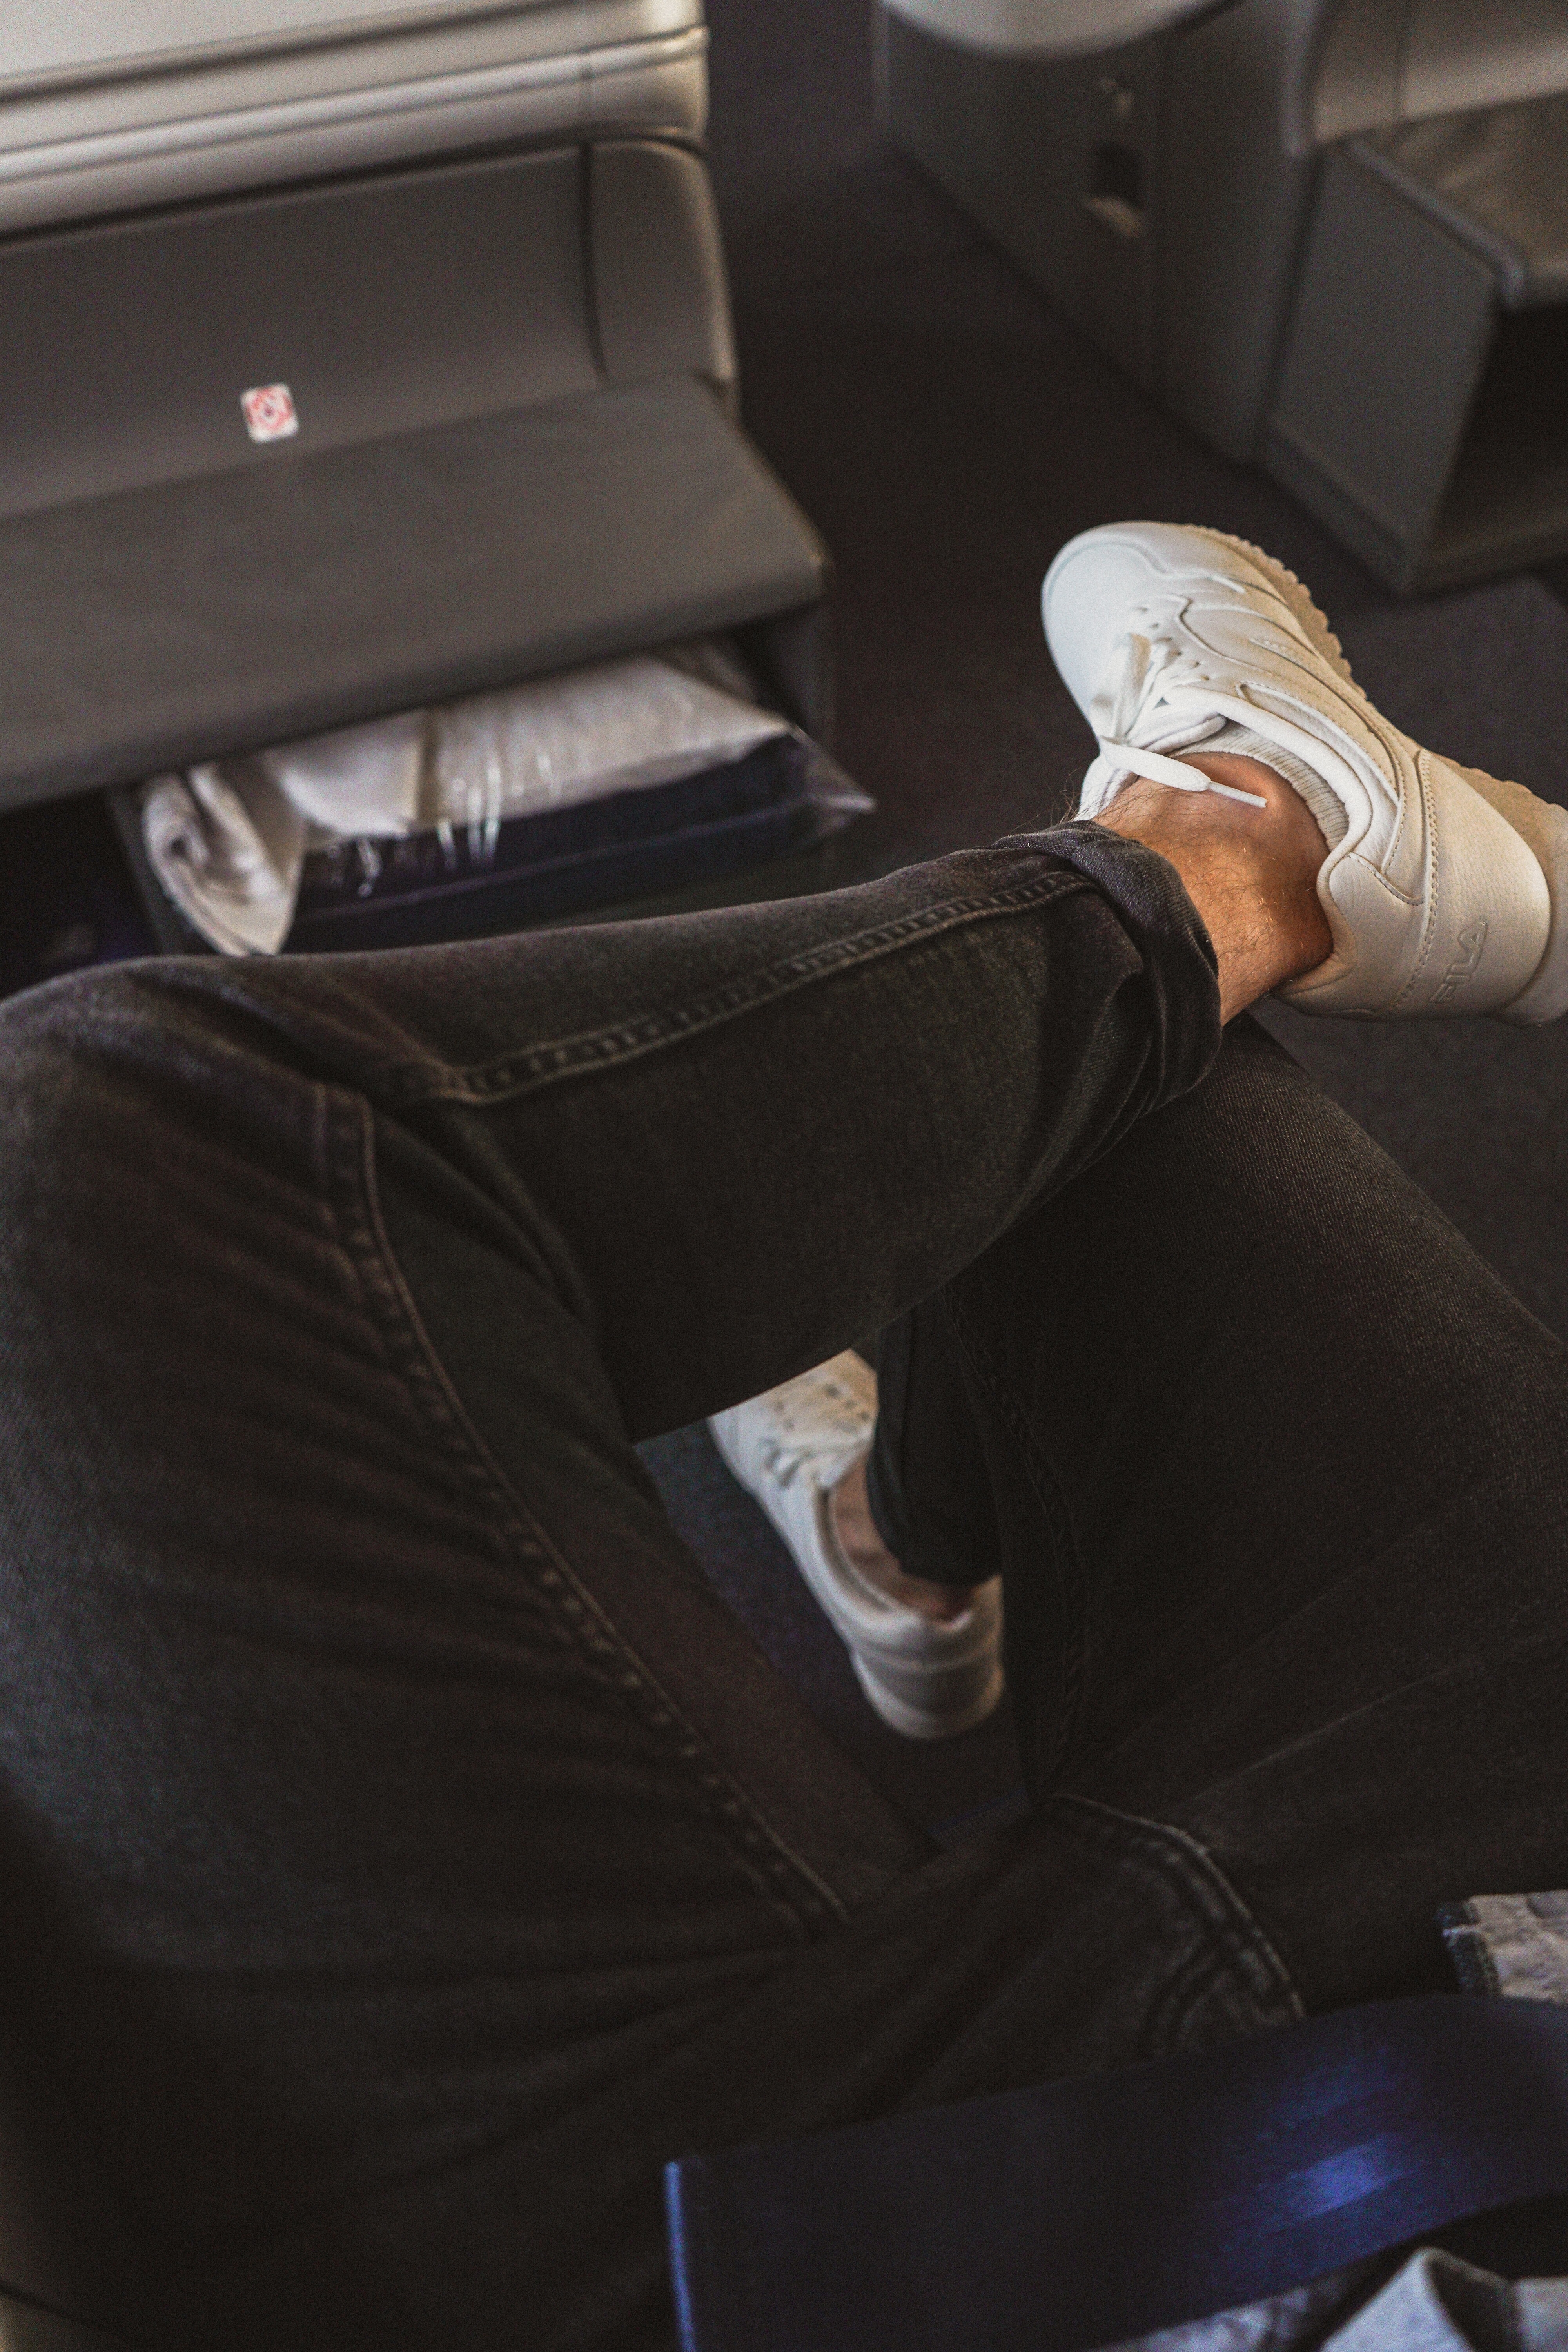 miscellanea, miscellaneous, legs, sneakers, style, clothing, jeans